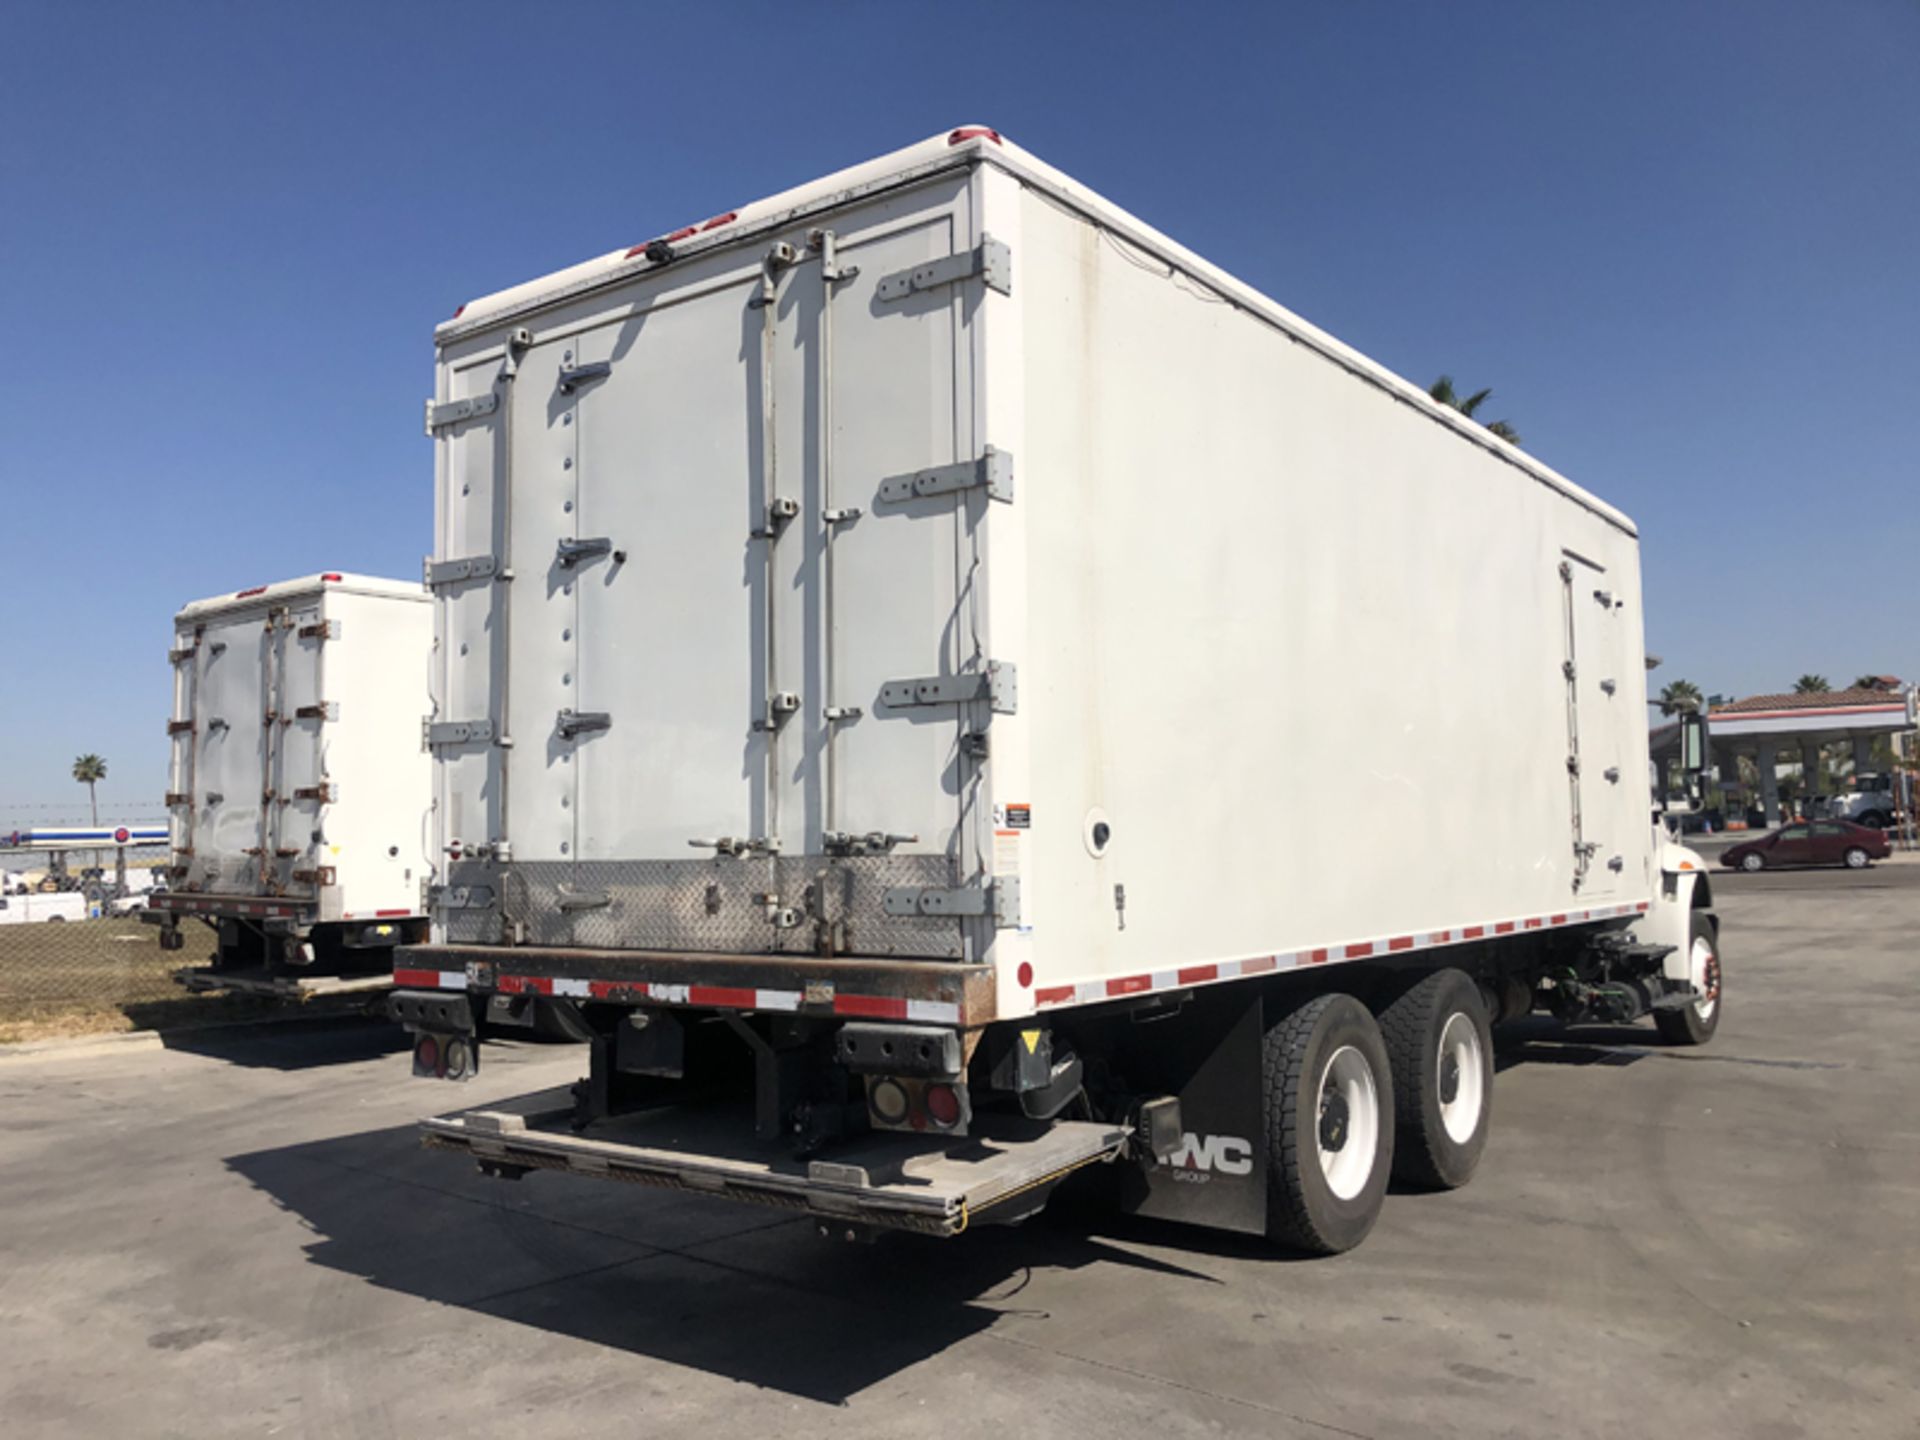 2018 INTERNATIONAL 4400 SBA 6X4 REFRIGERATED BOX TRUCK VIN#: 1HTMSTAR5JH048996, Approx Miles: 23006, - Image 6 of 9